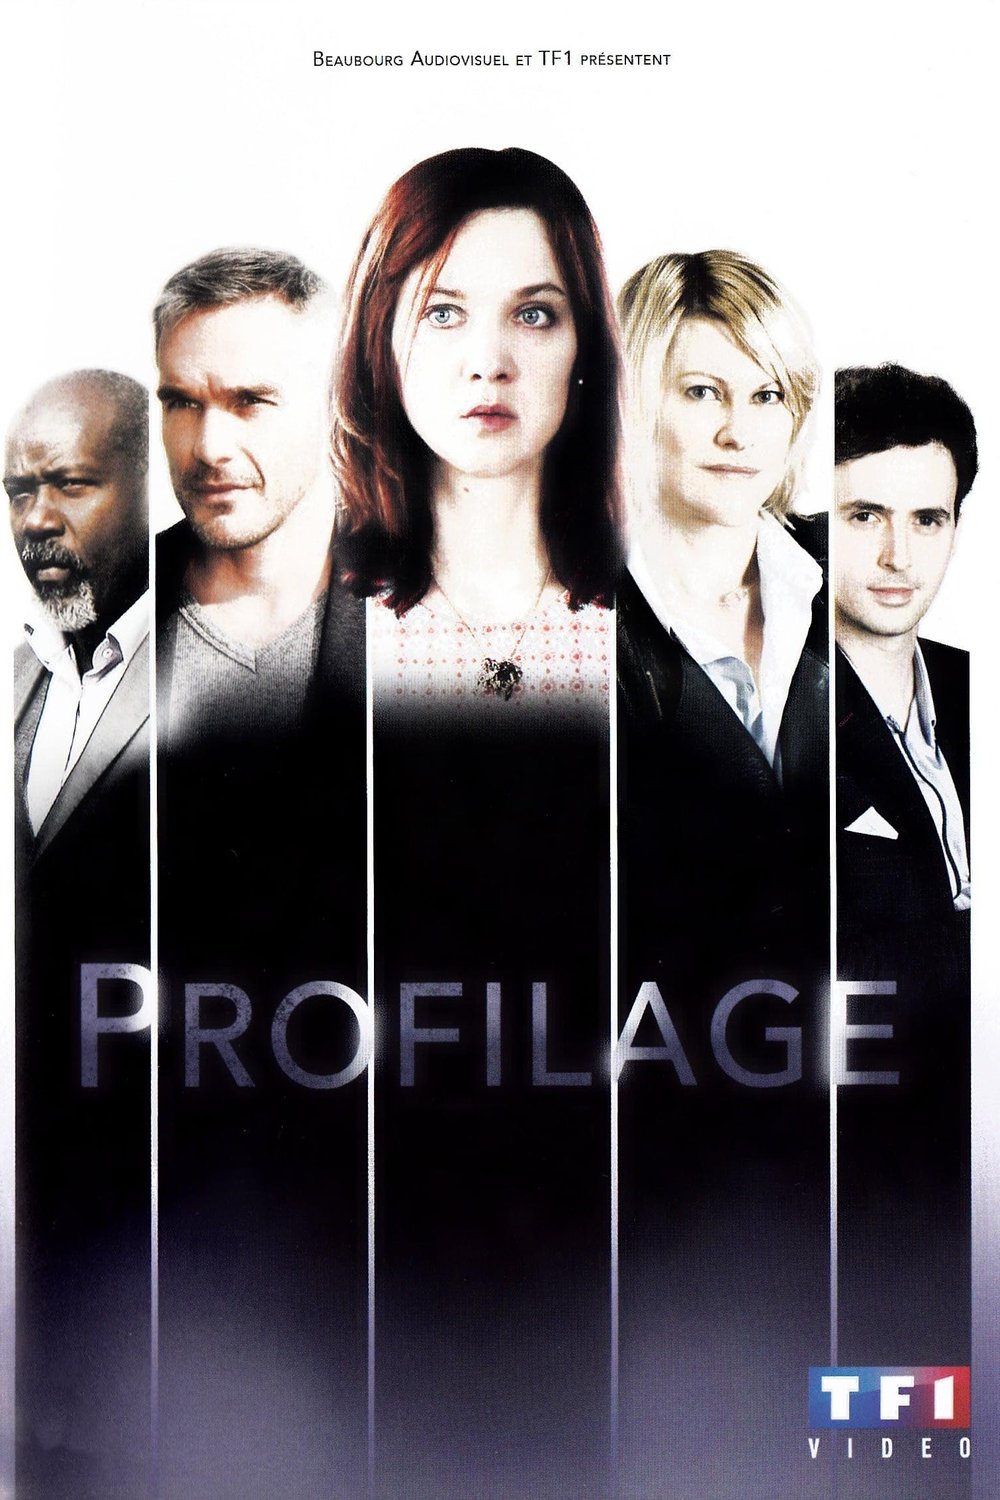 Poster of the movie Profilage